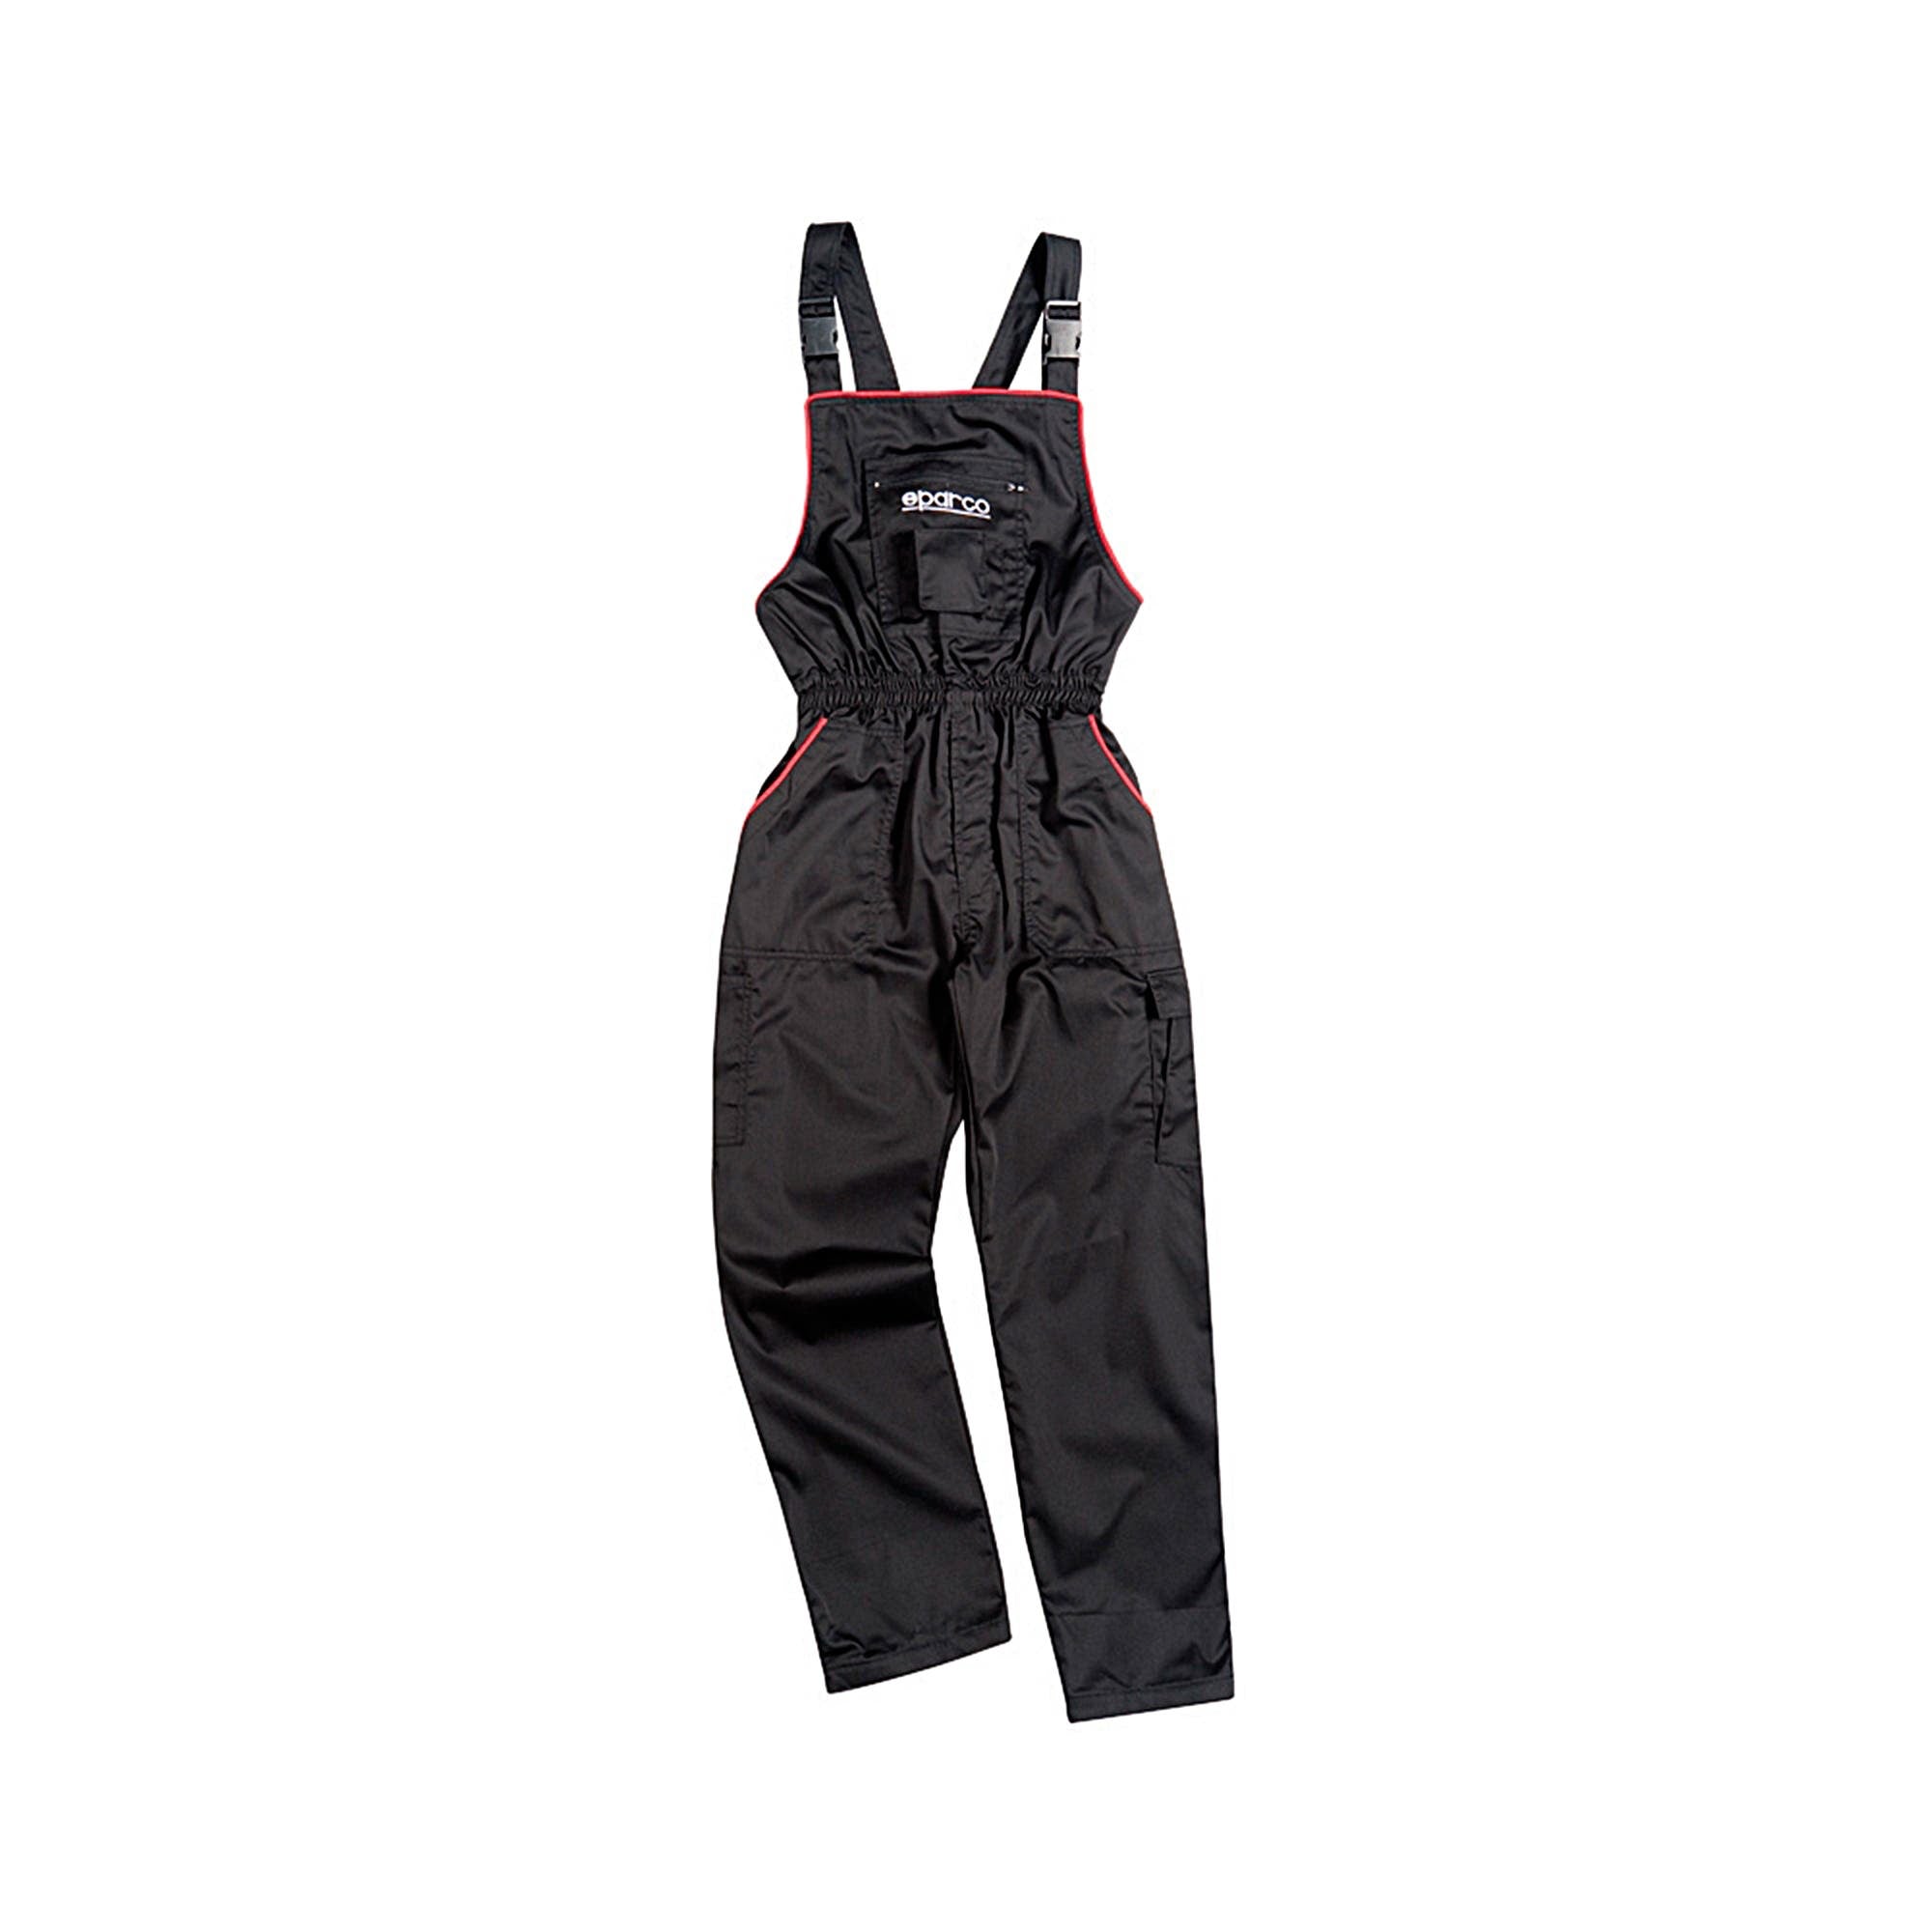 DUNGAREES - Sparco Shop